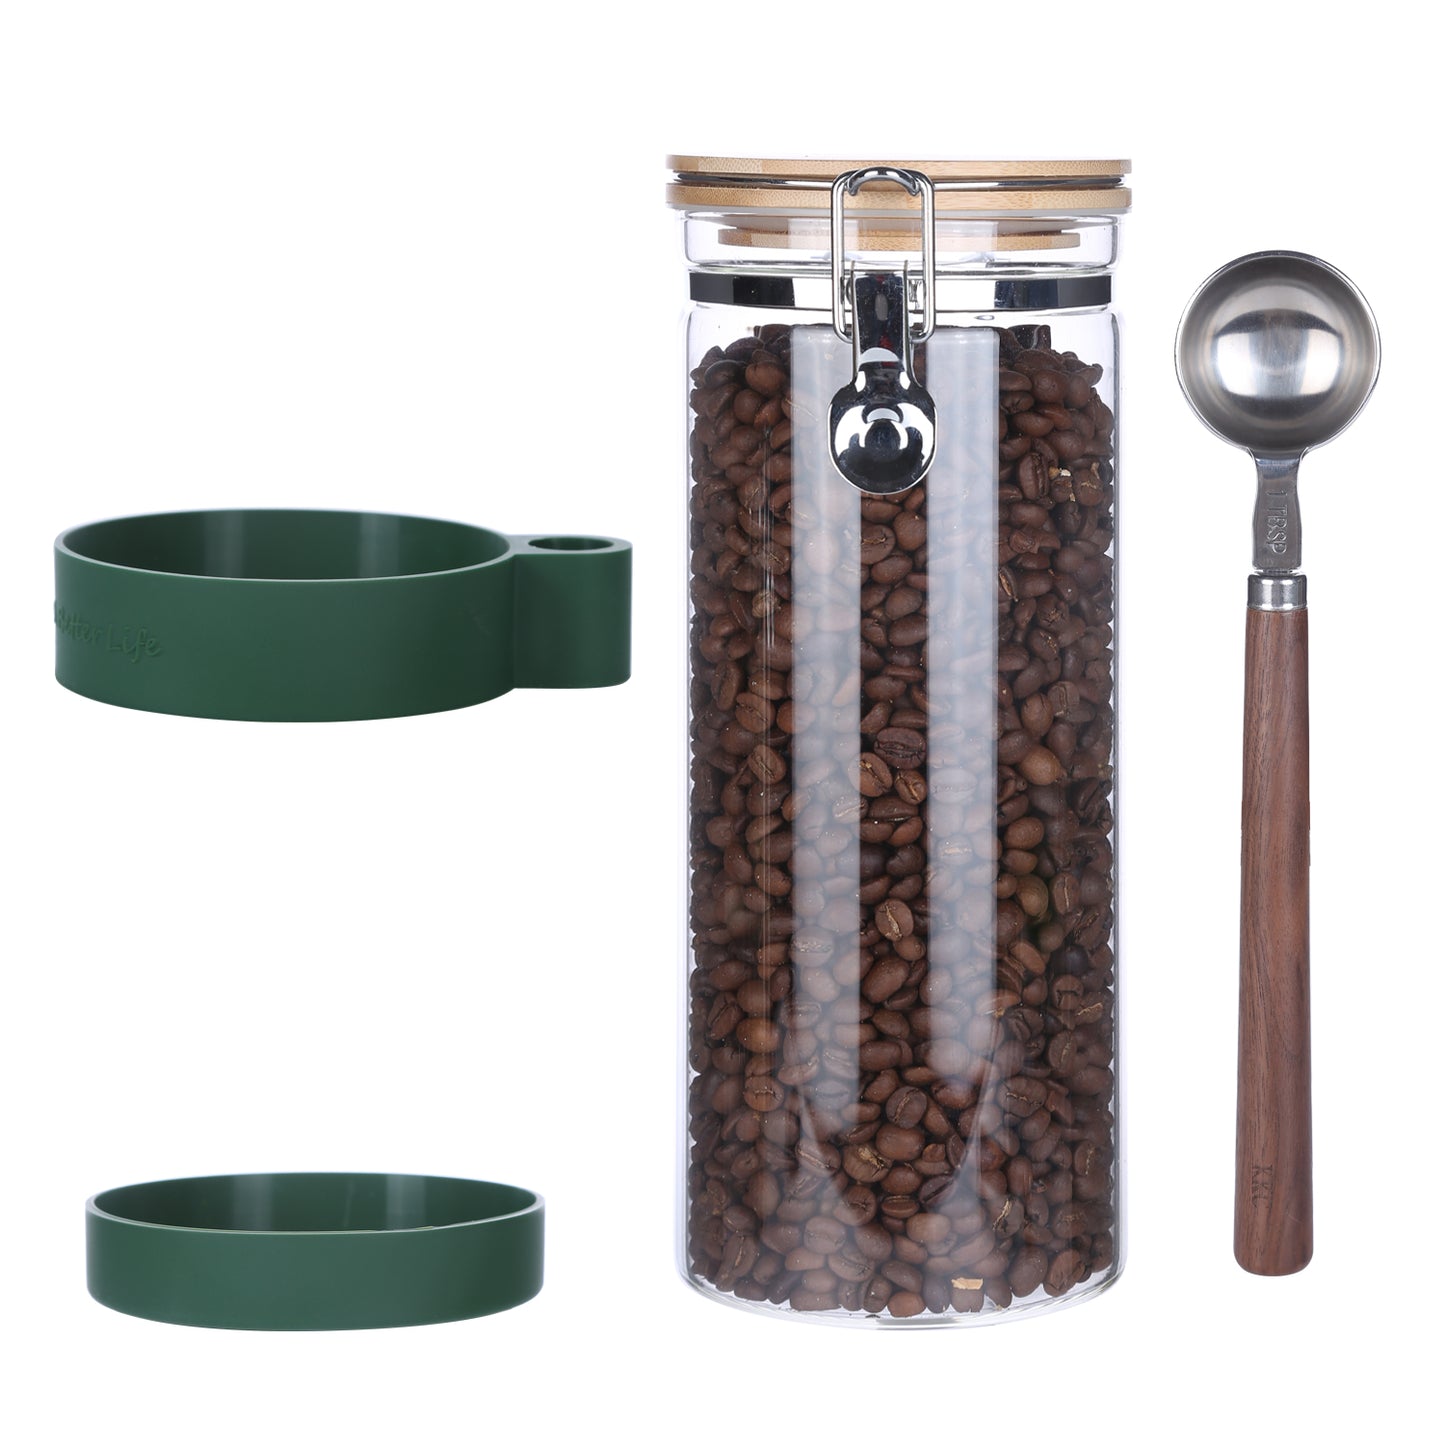 KKC  Glass Coffee Bean Storage Container with Scoop,Sealed Glass Storage Jar with Airtight Locking Lid,Airtight Nut Container,Sealed Container for Coffee Ground,Nut,Cereal,Pasta,50 fluid-oz